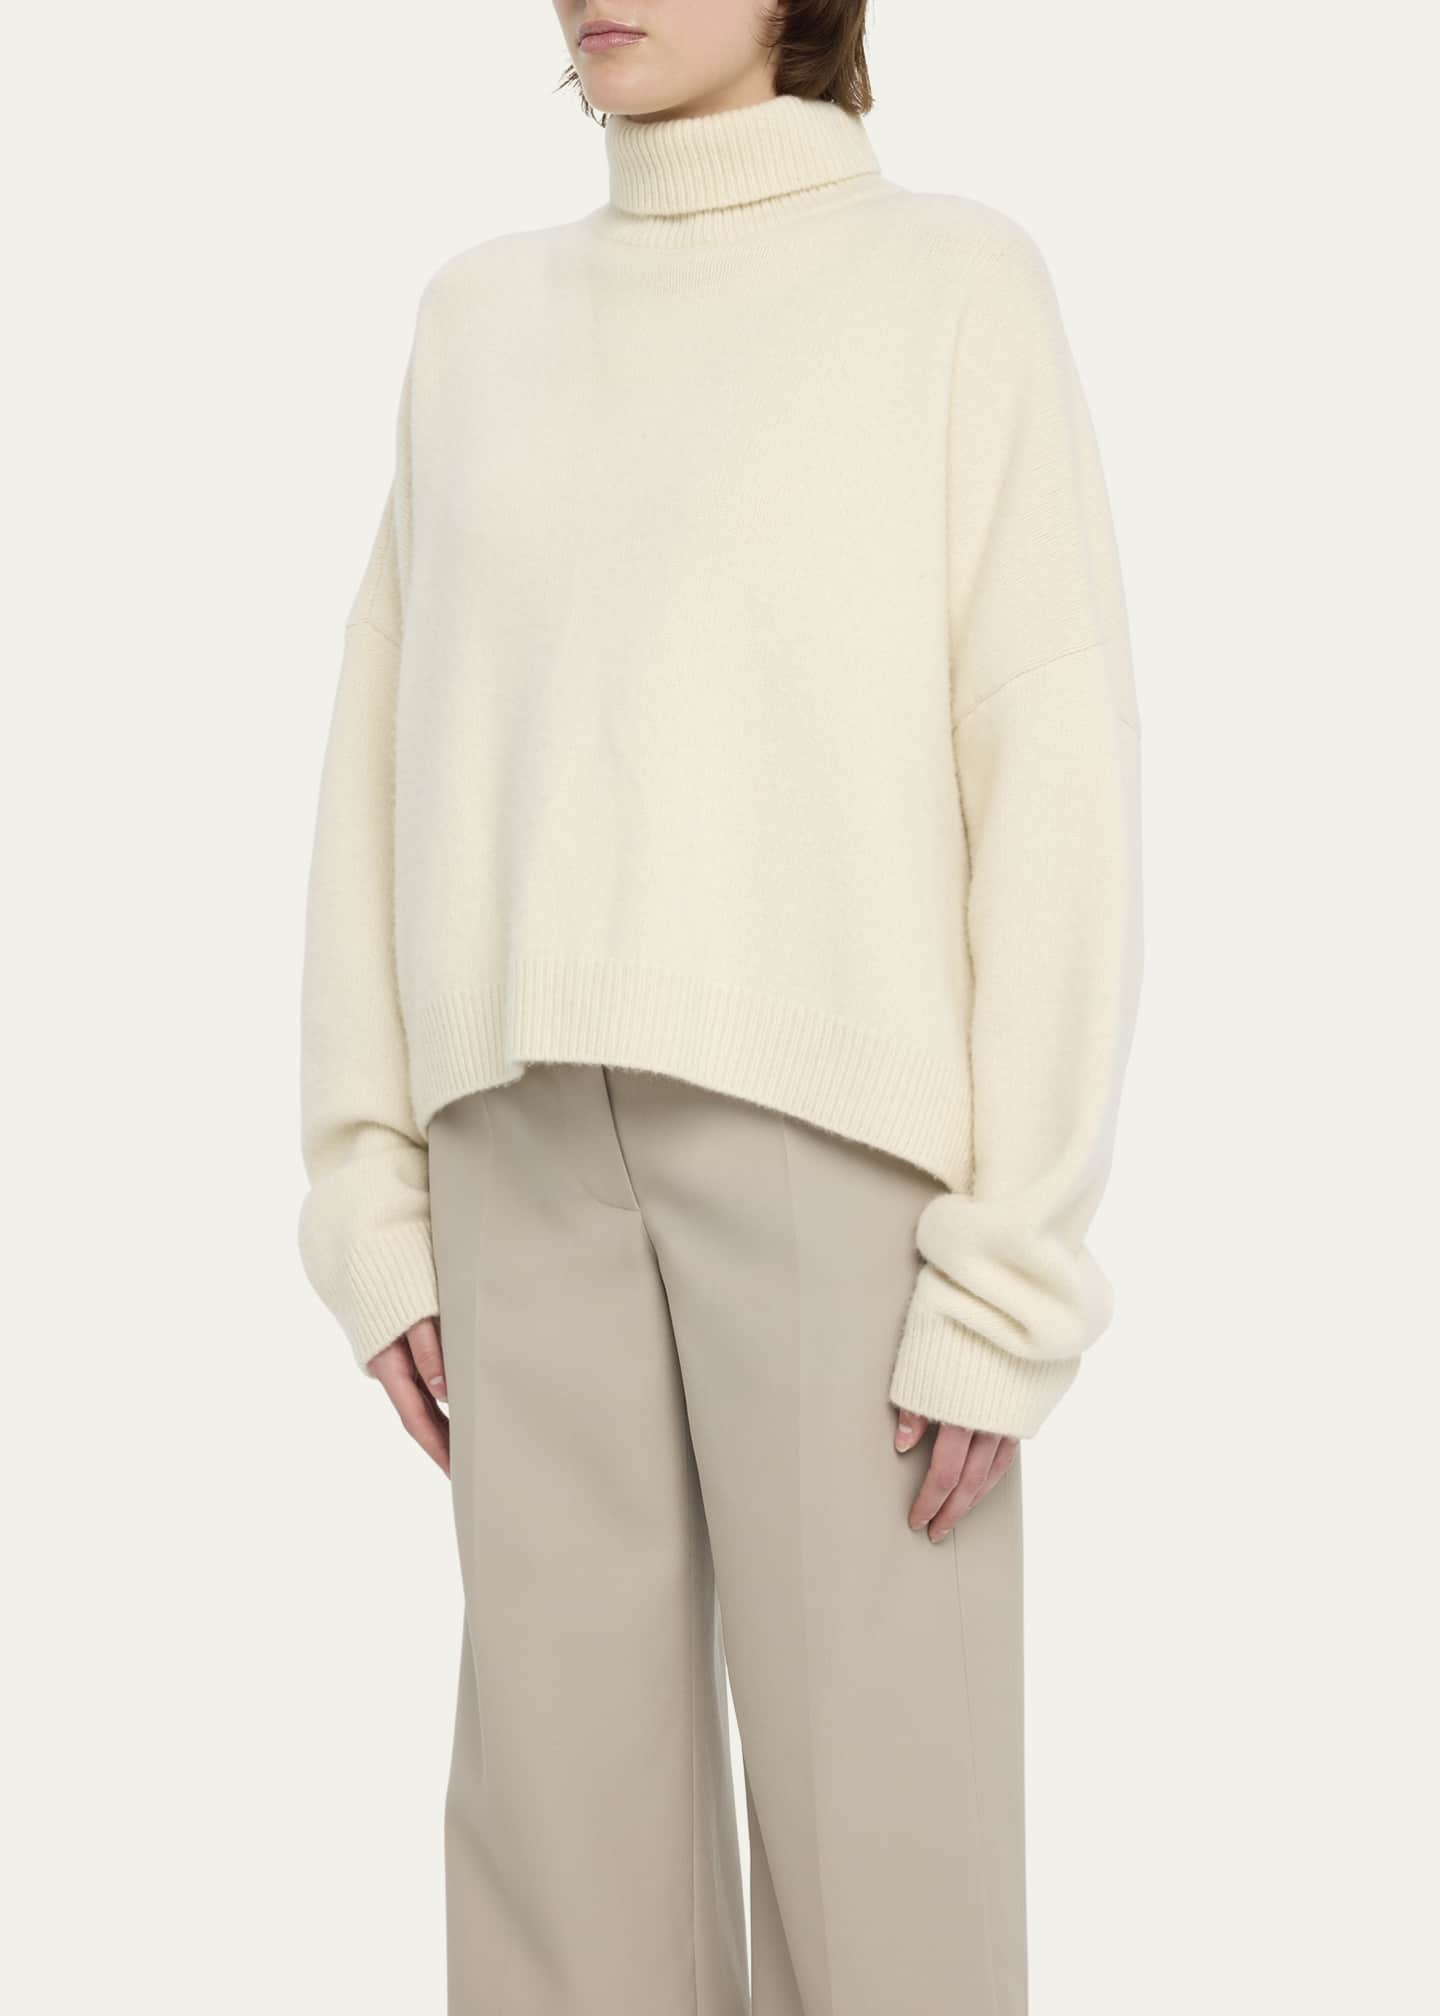 Ezio wool and cashmere sweater